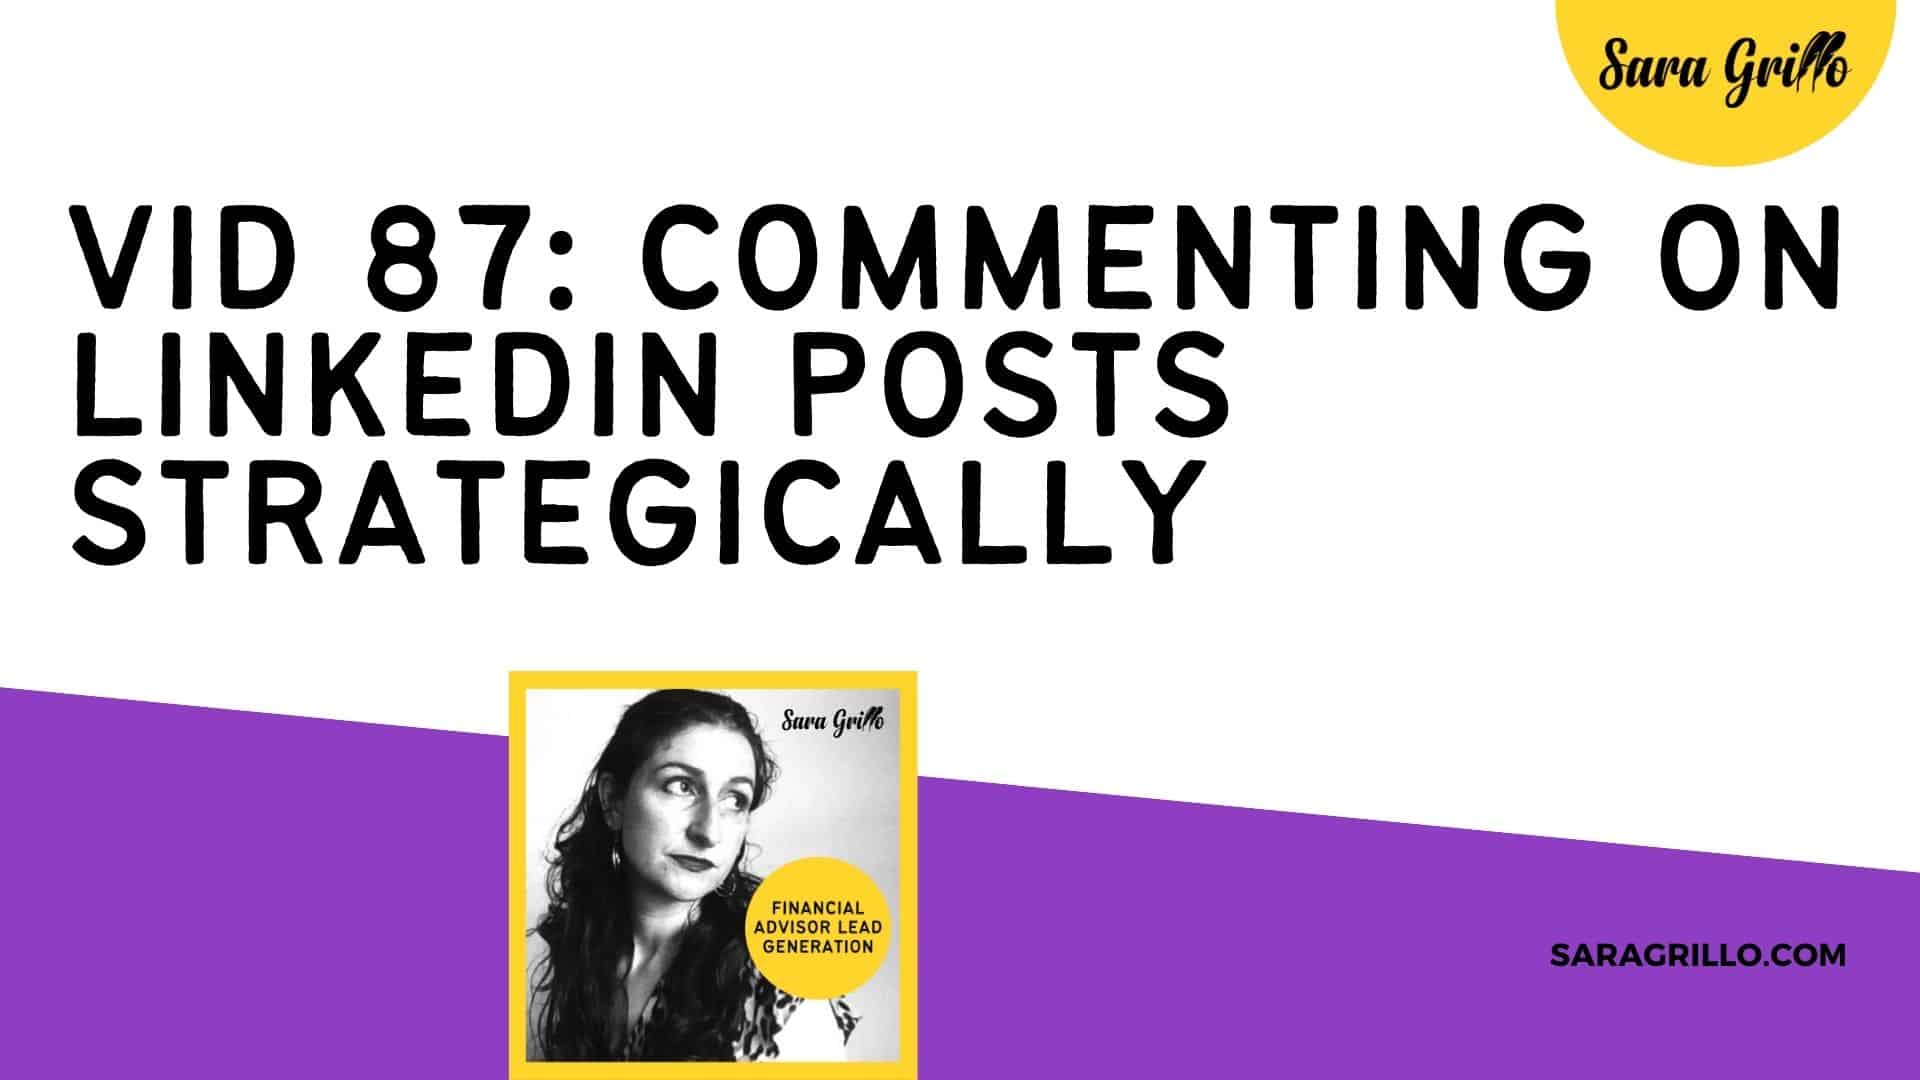 Here are some tips for how to comment on LinkedIn posts strategically so that you can get leads and build your connections.